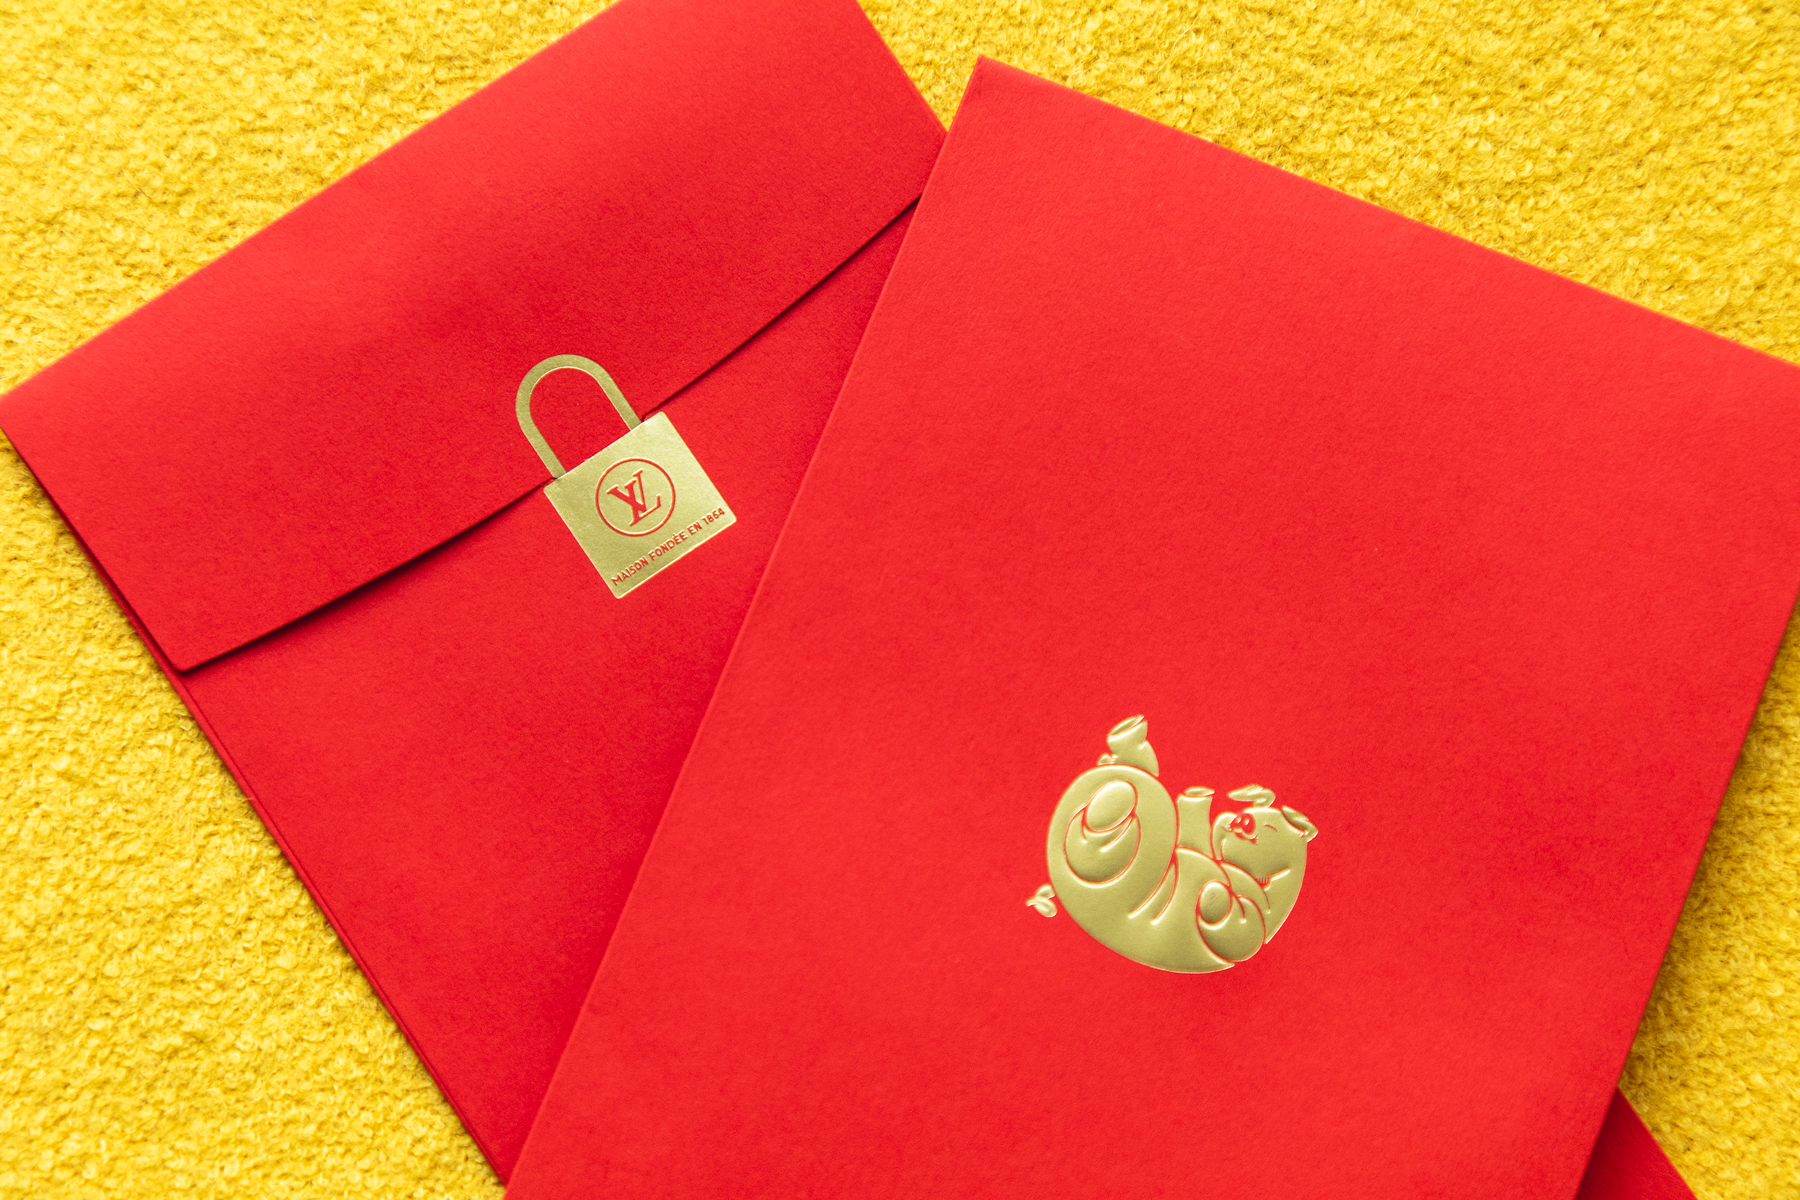 Here’s How Brands Are Celebrating Lunar New Year With Traditional “Red